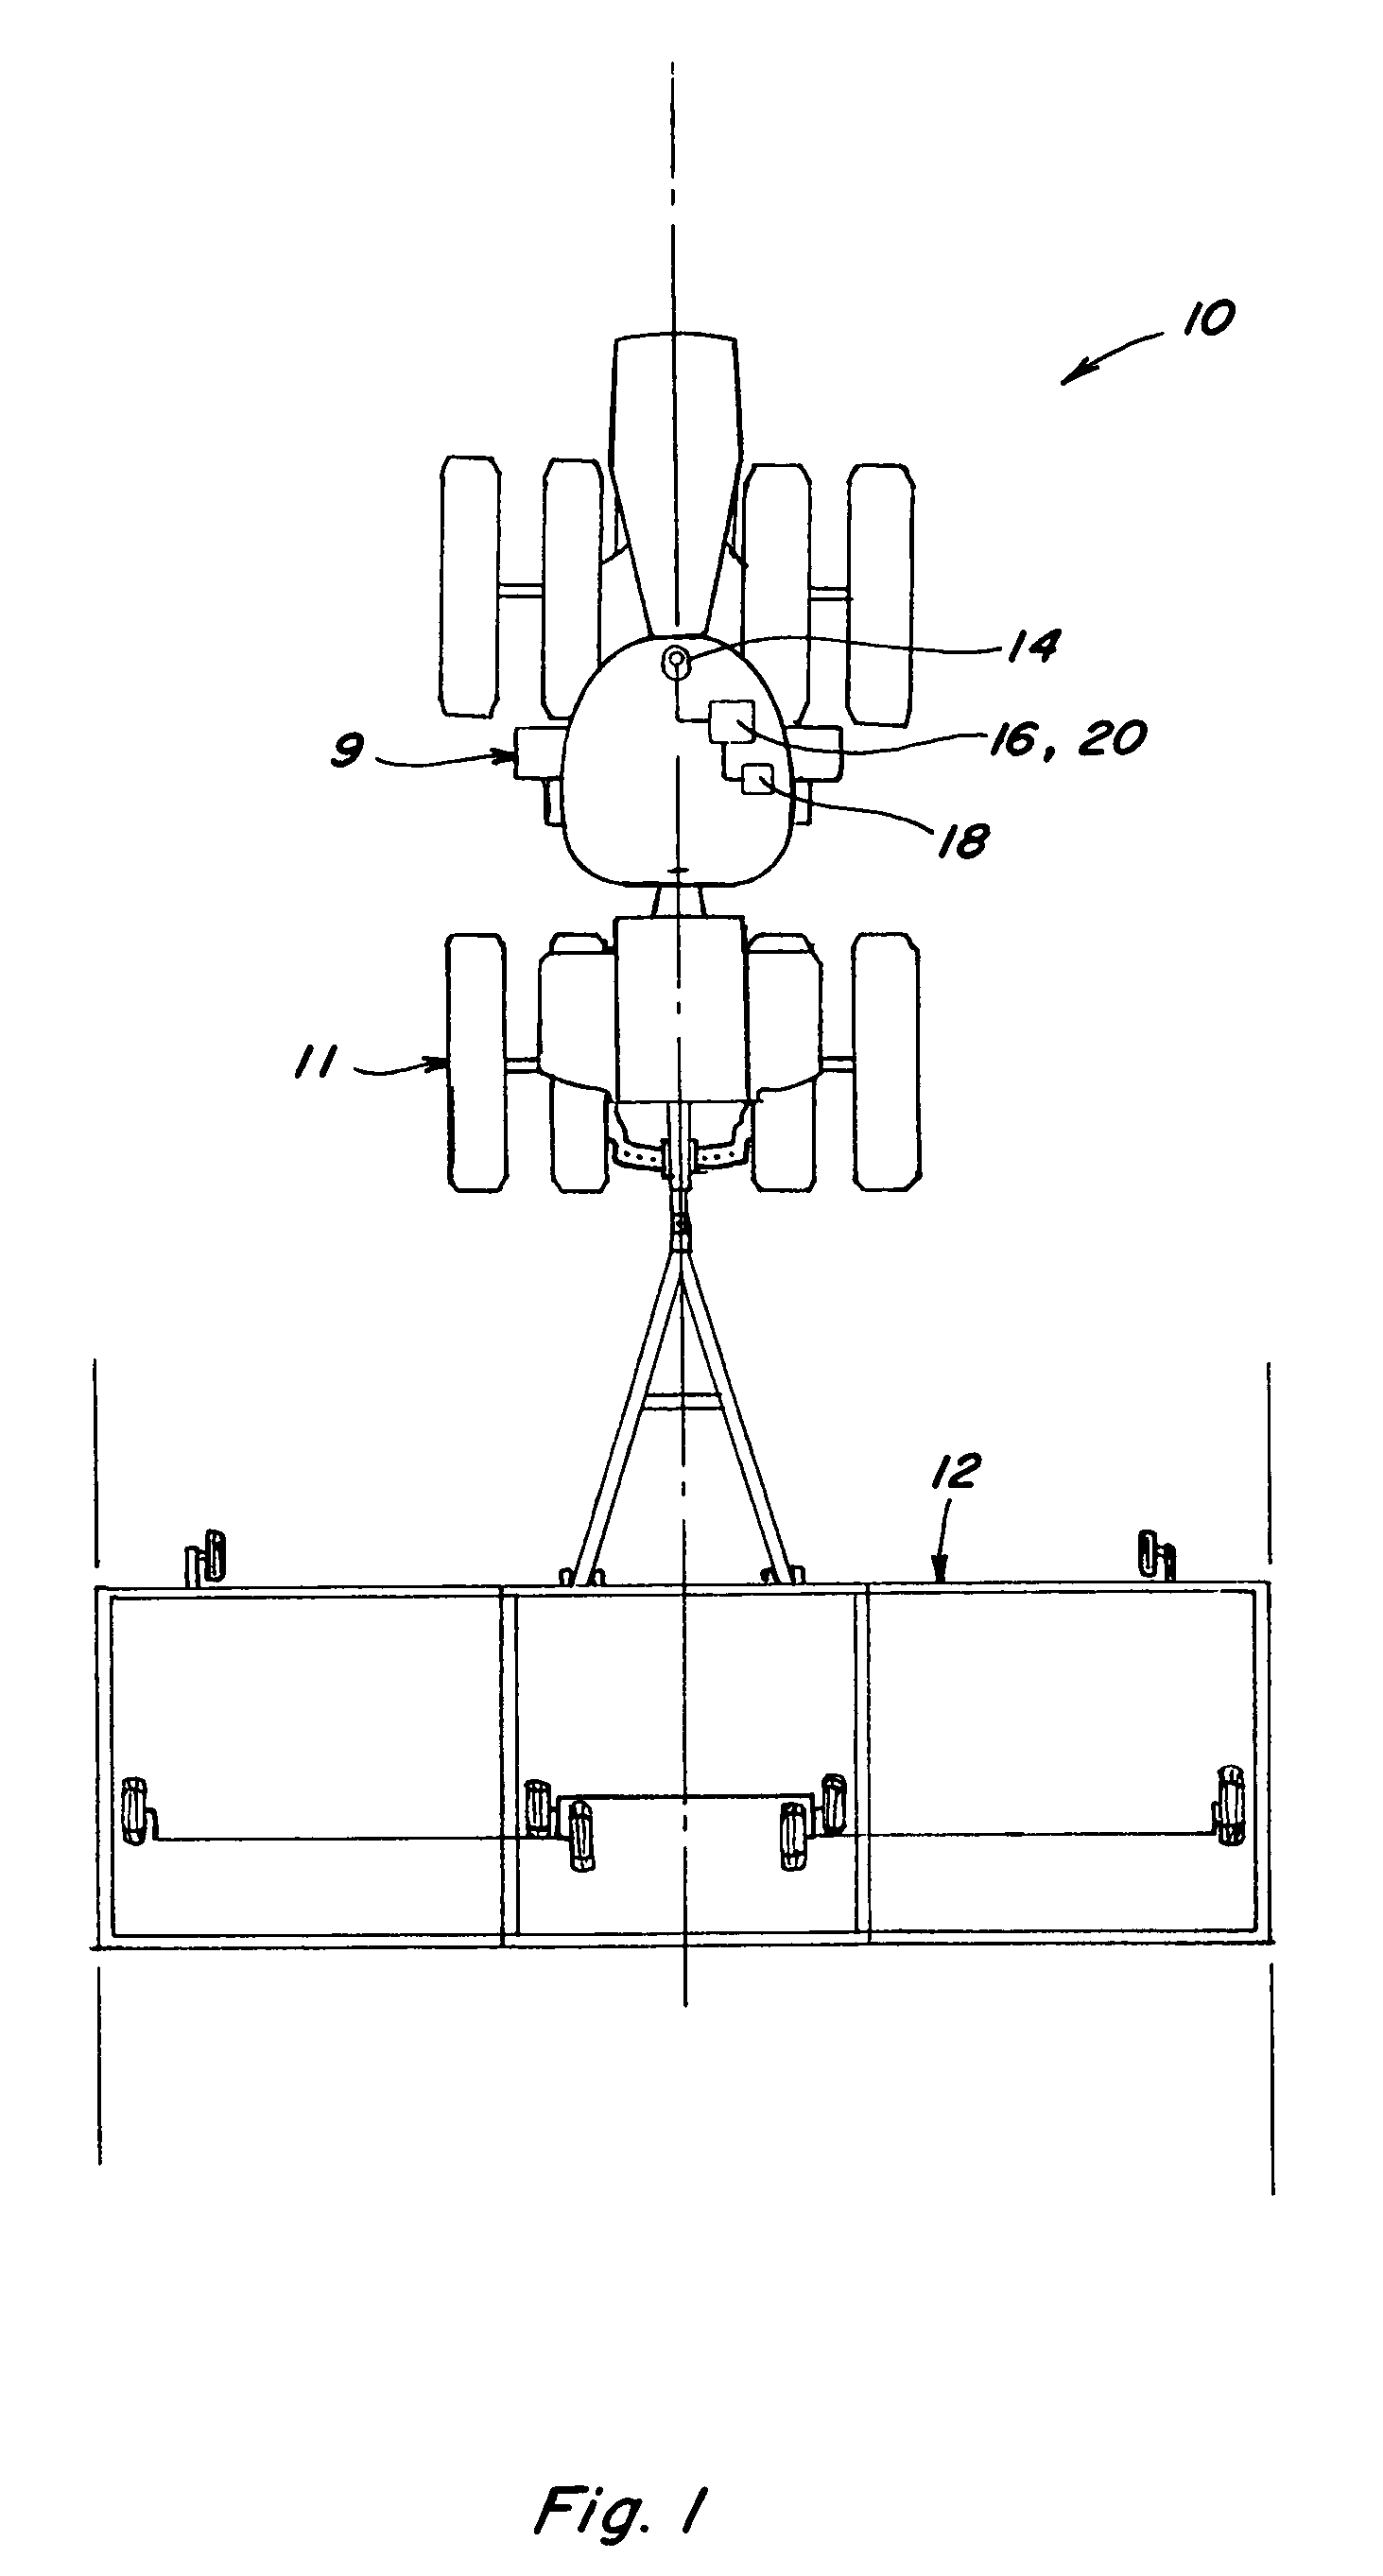 Swath line creation including slope compensation for an automatic guidance system of a work vehicle